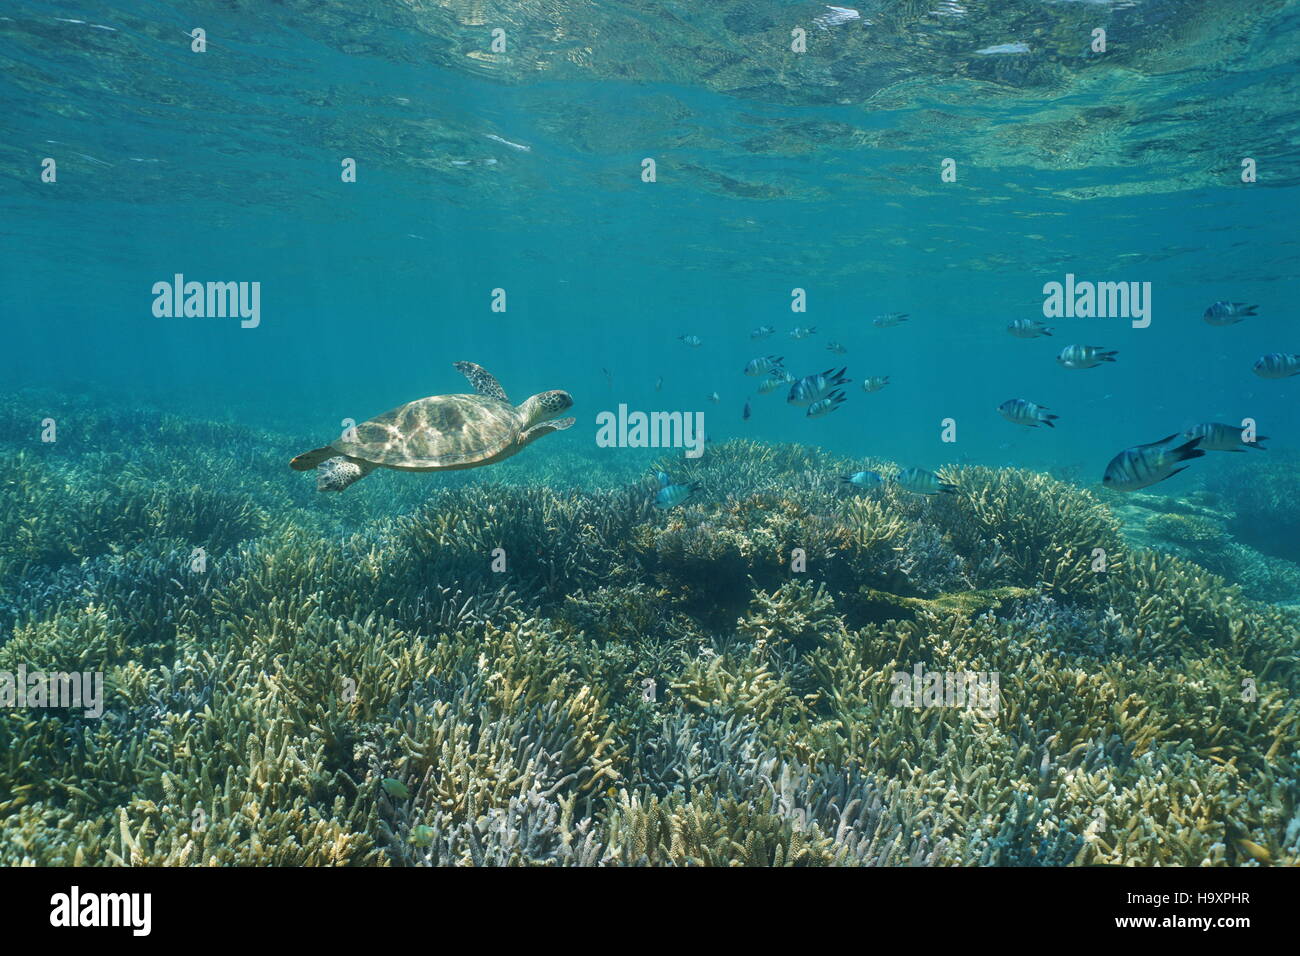 Underwater coral reef with a green sea turtle and fish, New Caledonia, south Pacific ocean Stock Photo